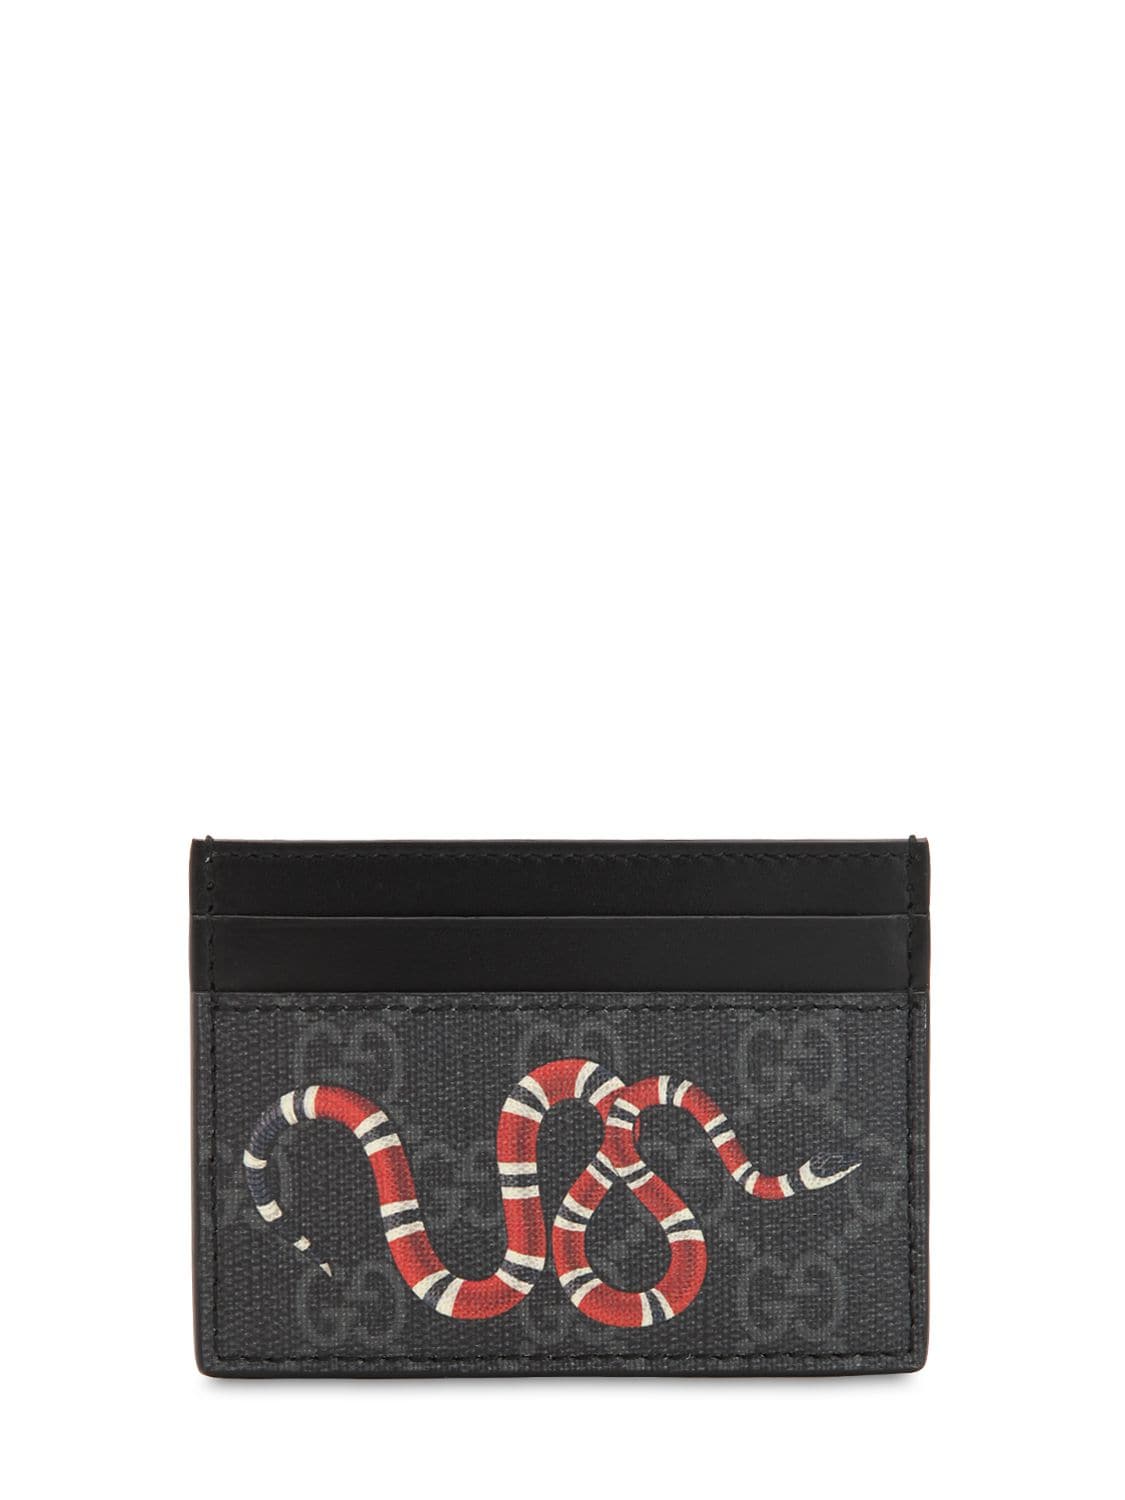 GUCCI Snake Gg Supreme Coated Canvas Card Hold for Men